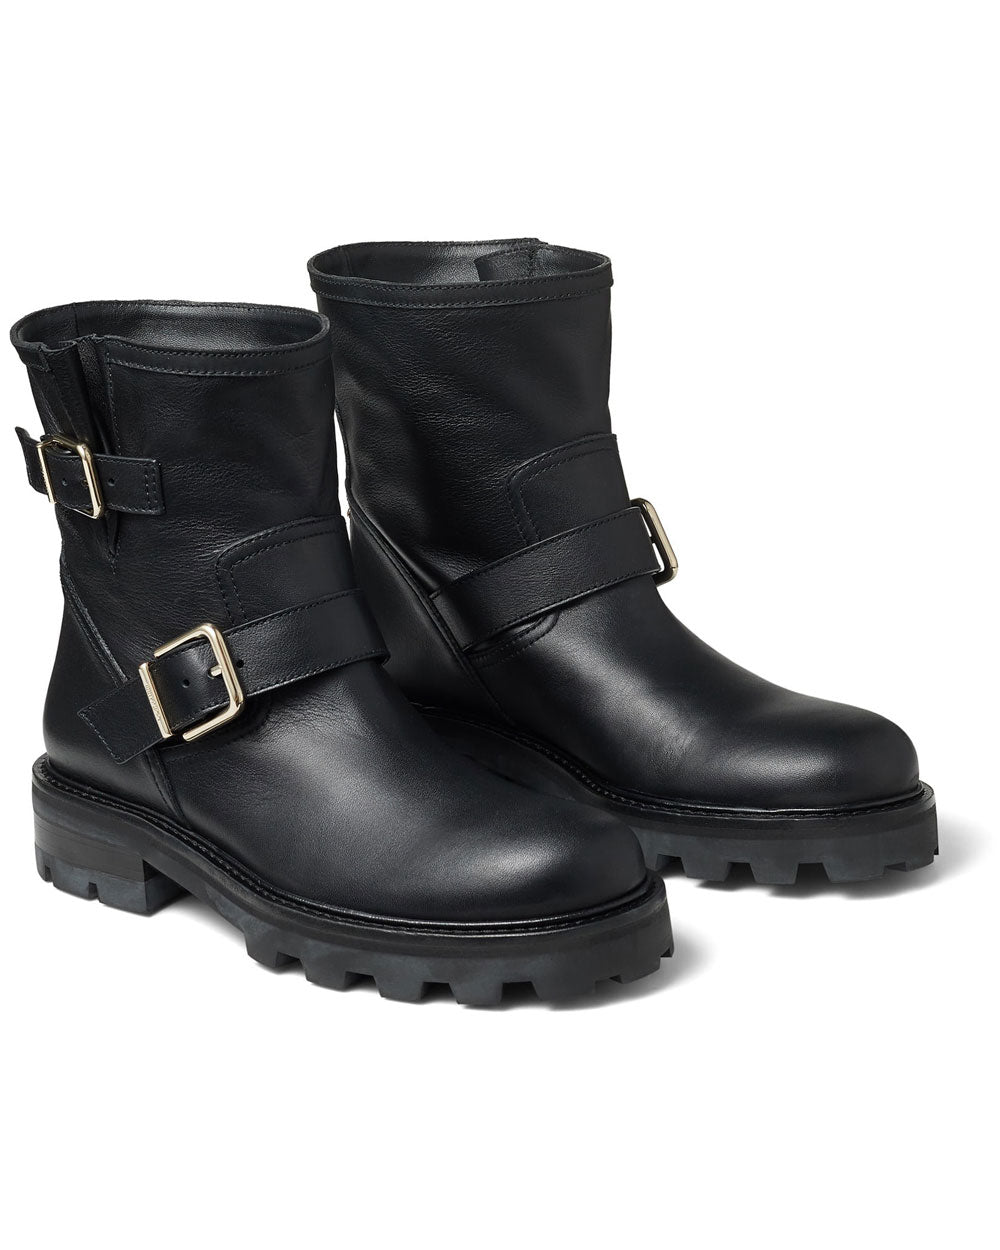 Youth II Boot in Black